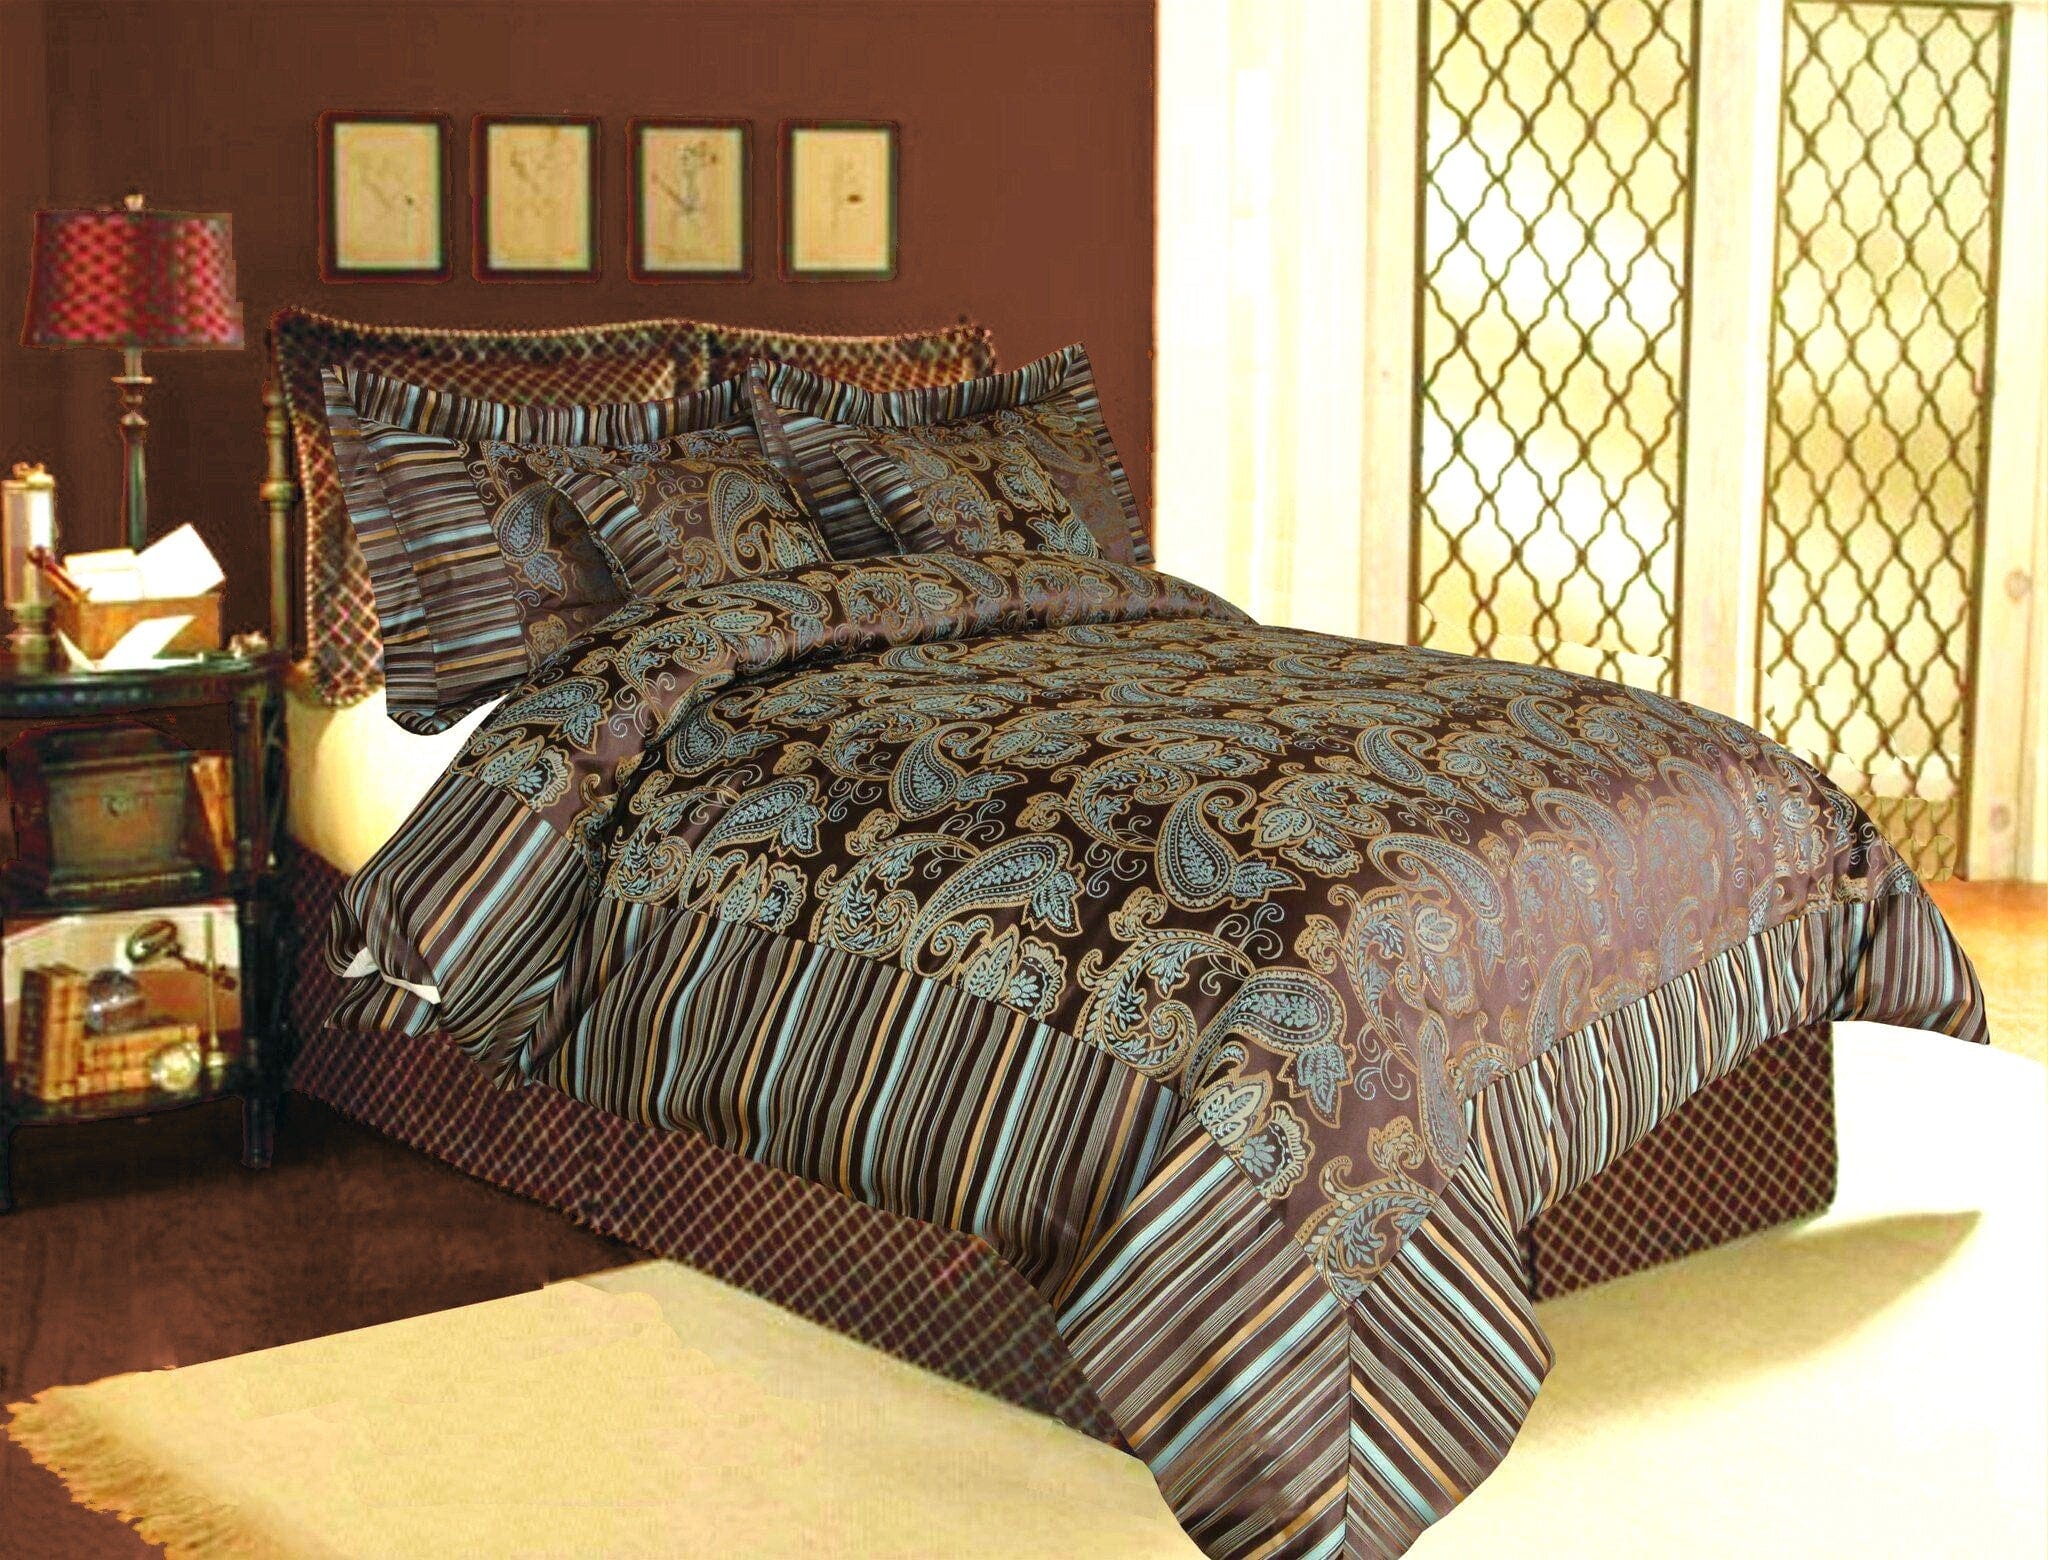 Tache Chenille Elegant Paisley Floral Striped Brown Blue Eastern Comforter Set With Zipper Cover (14070)